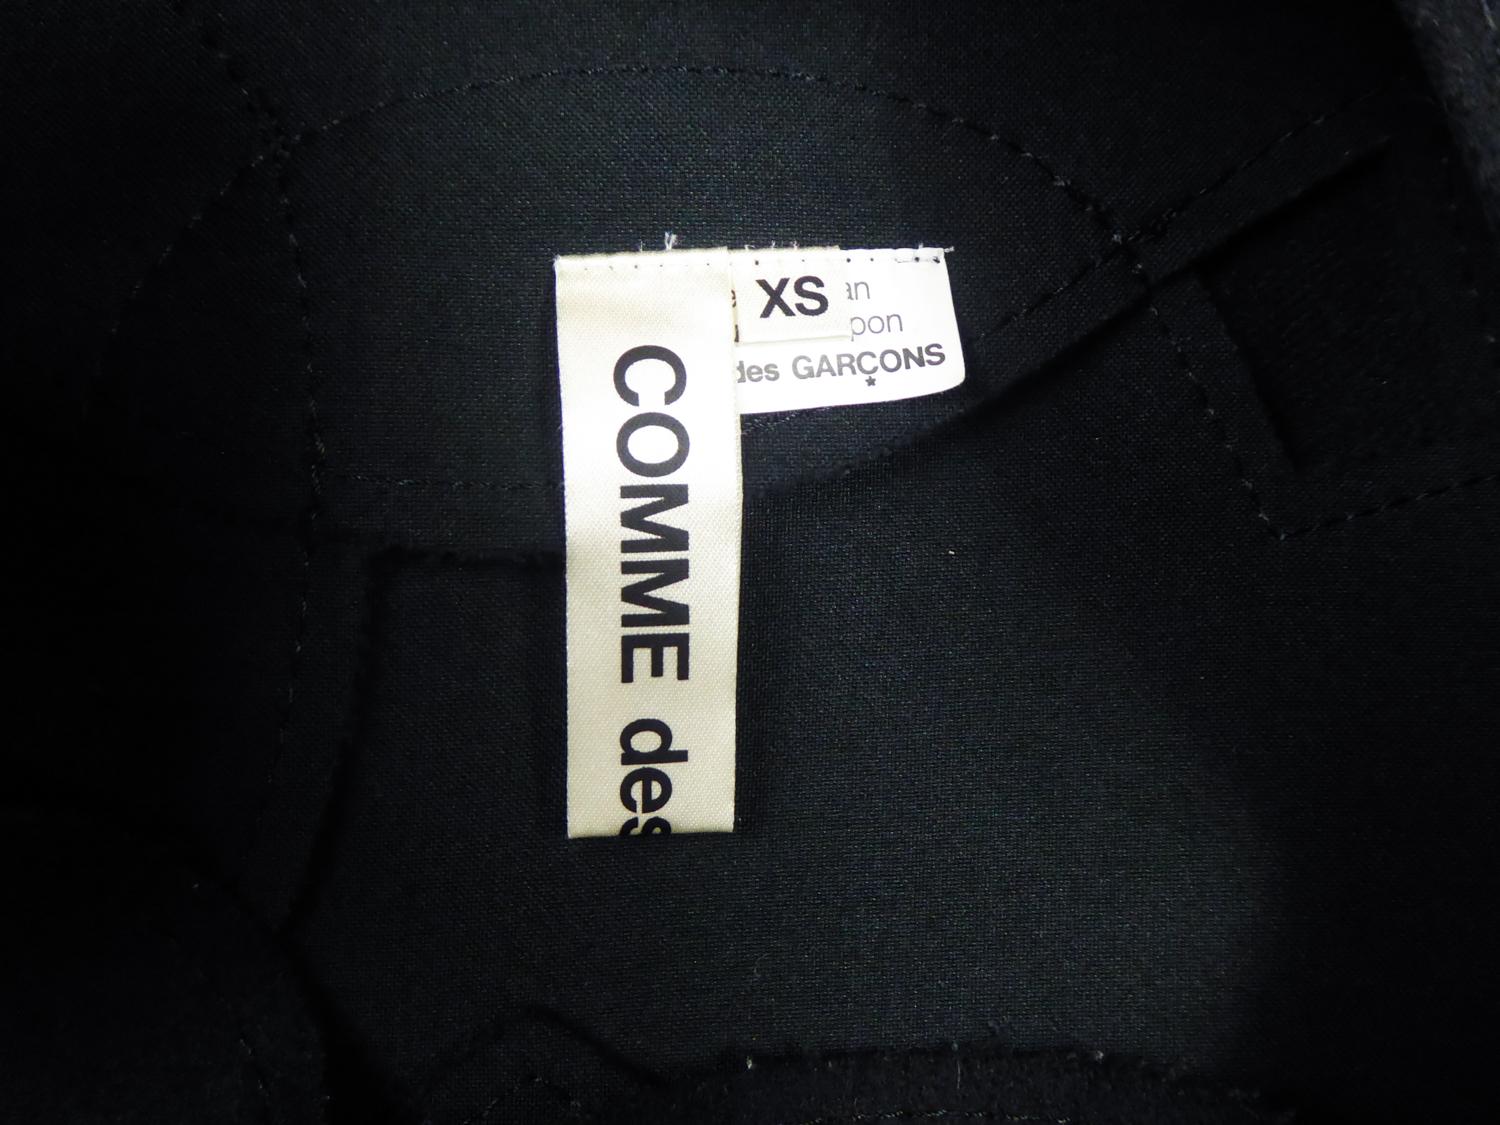 A Comme des Garcons Junya Watanabe Black Woollen Chasuble Dress Circa 2000 In Good Condition For Sale In Toulon, FR